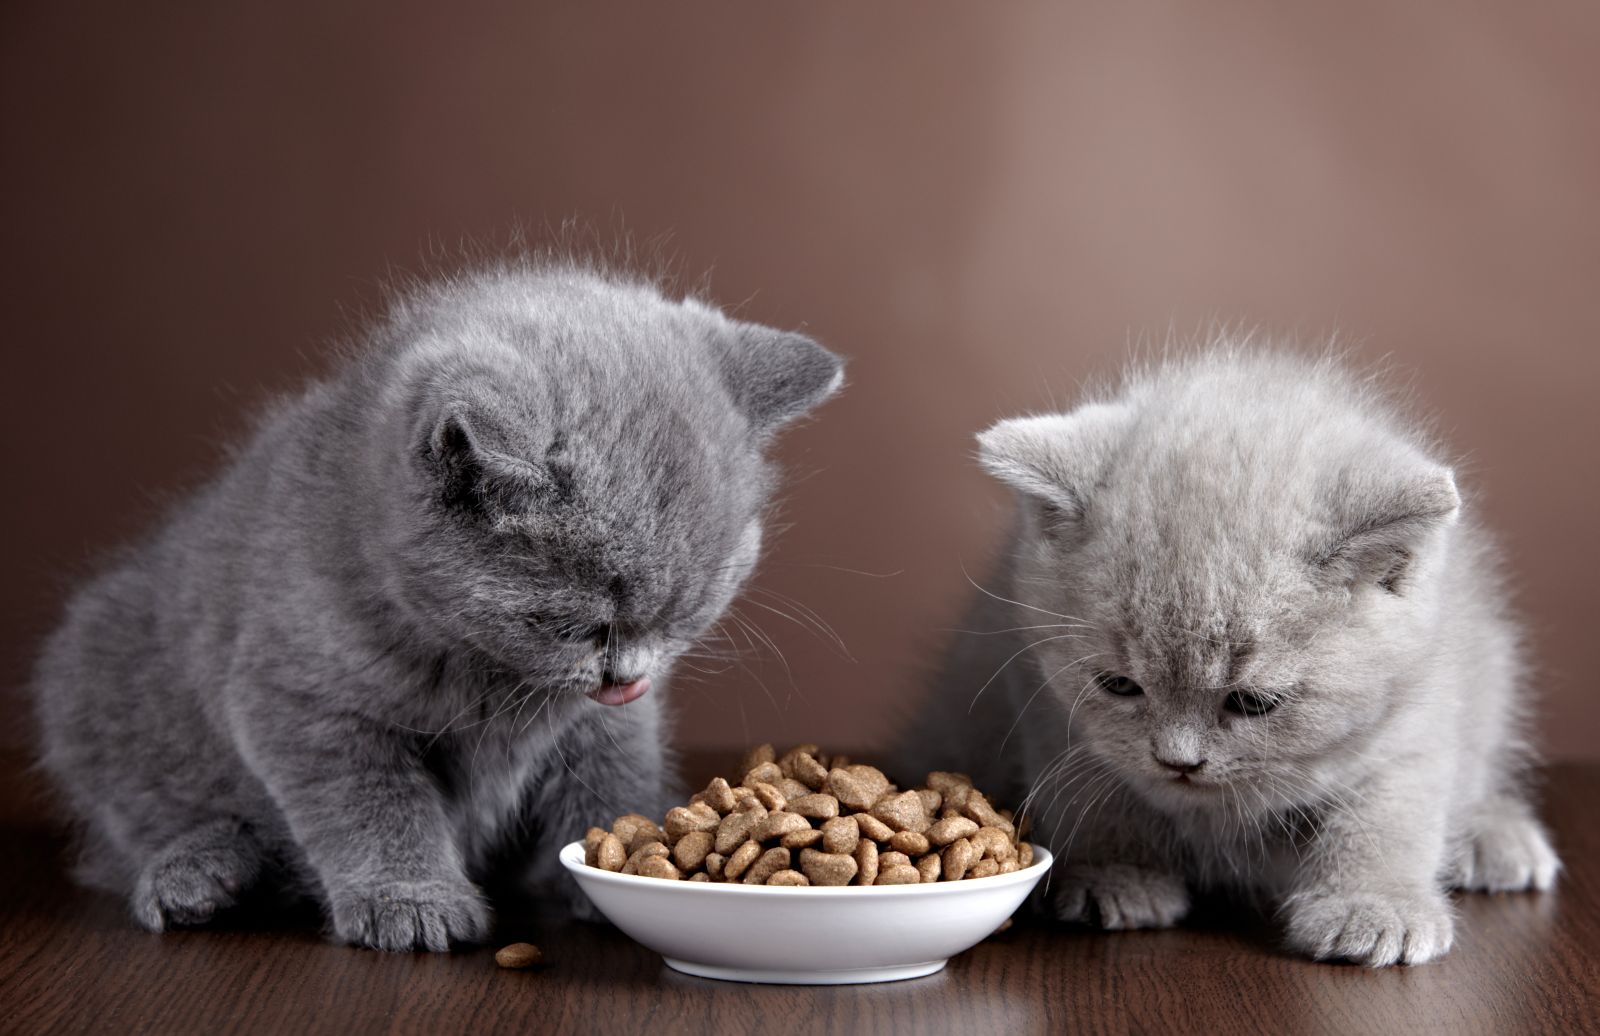 What Domestic And Wild Cat Breeds Are You A Combo Of? cat food